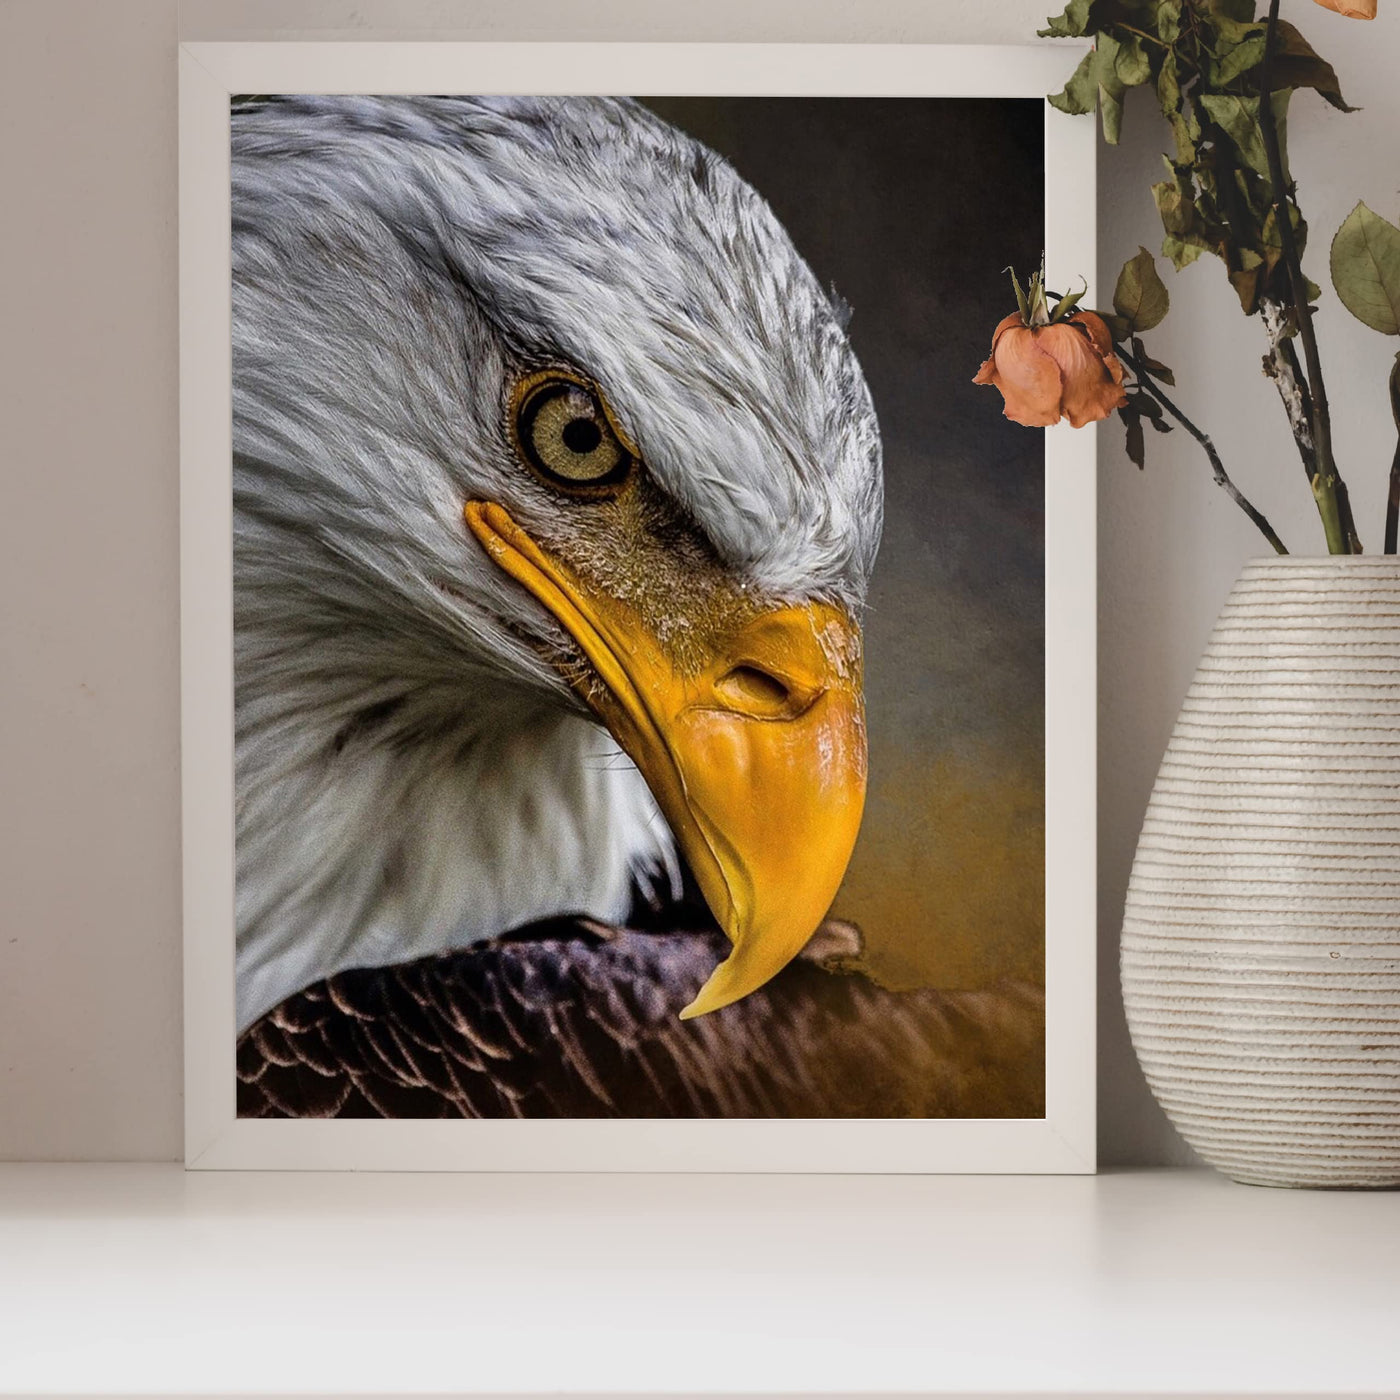 Majestic Bald Eagle Motivational American Wall Art -8 x 10" Patriotic Eagle Photo Print-Ready to Frame. Inspirational Home-Office-School-Cave Decor. Great for Animal & Political Theme Wall Decor!